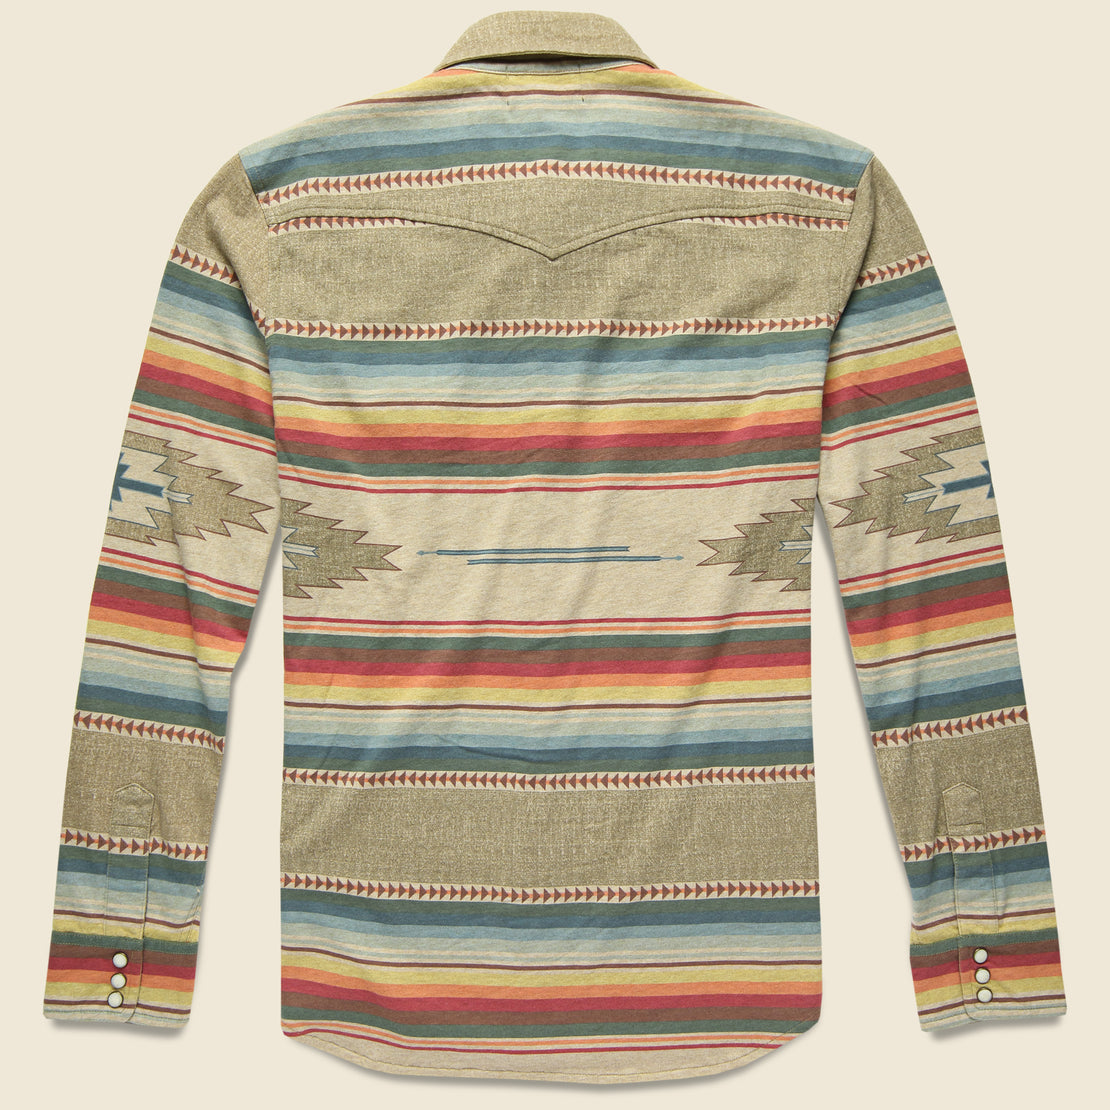 Jacquard Knit Western Shirt - Brown Multi - RRL - STAG Provisions - Tops - L/S Woven - Other Pattern